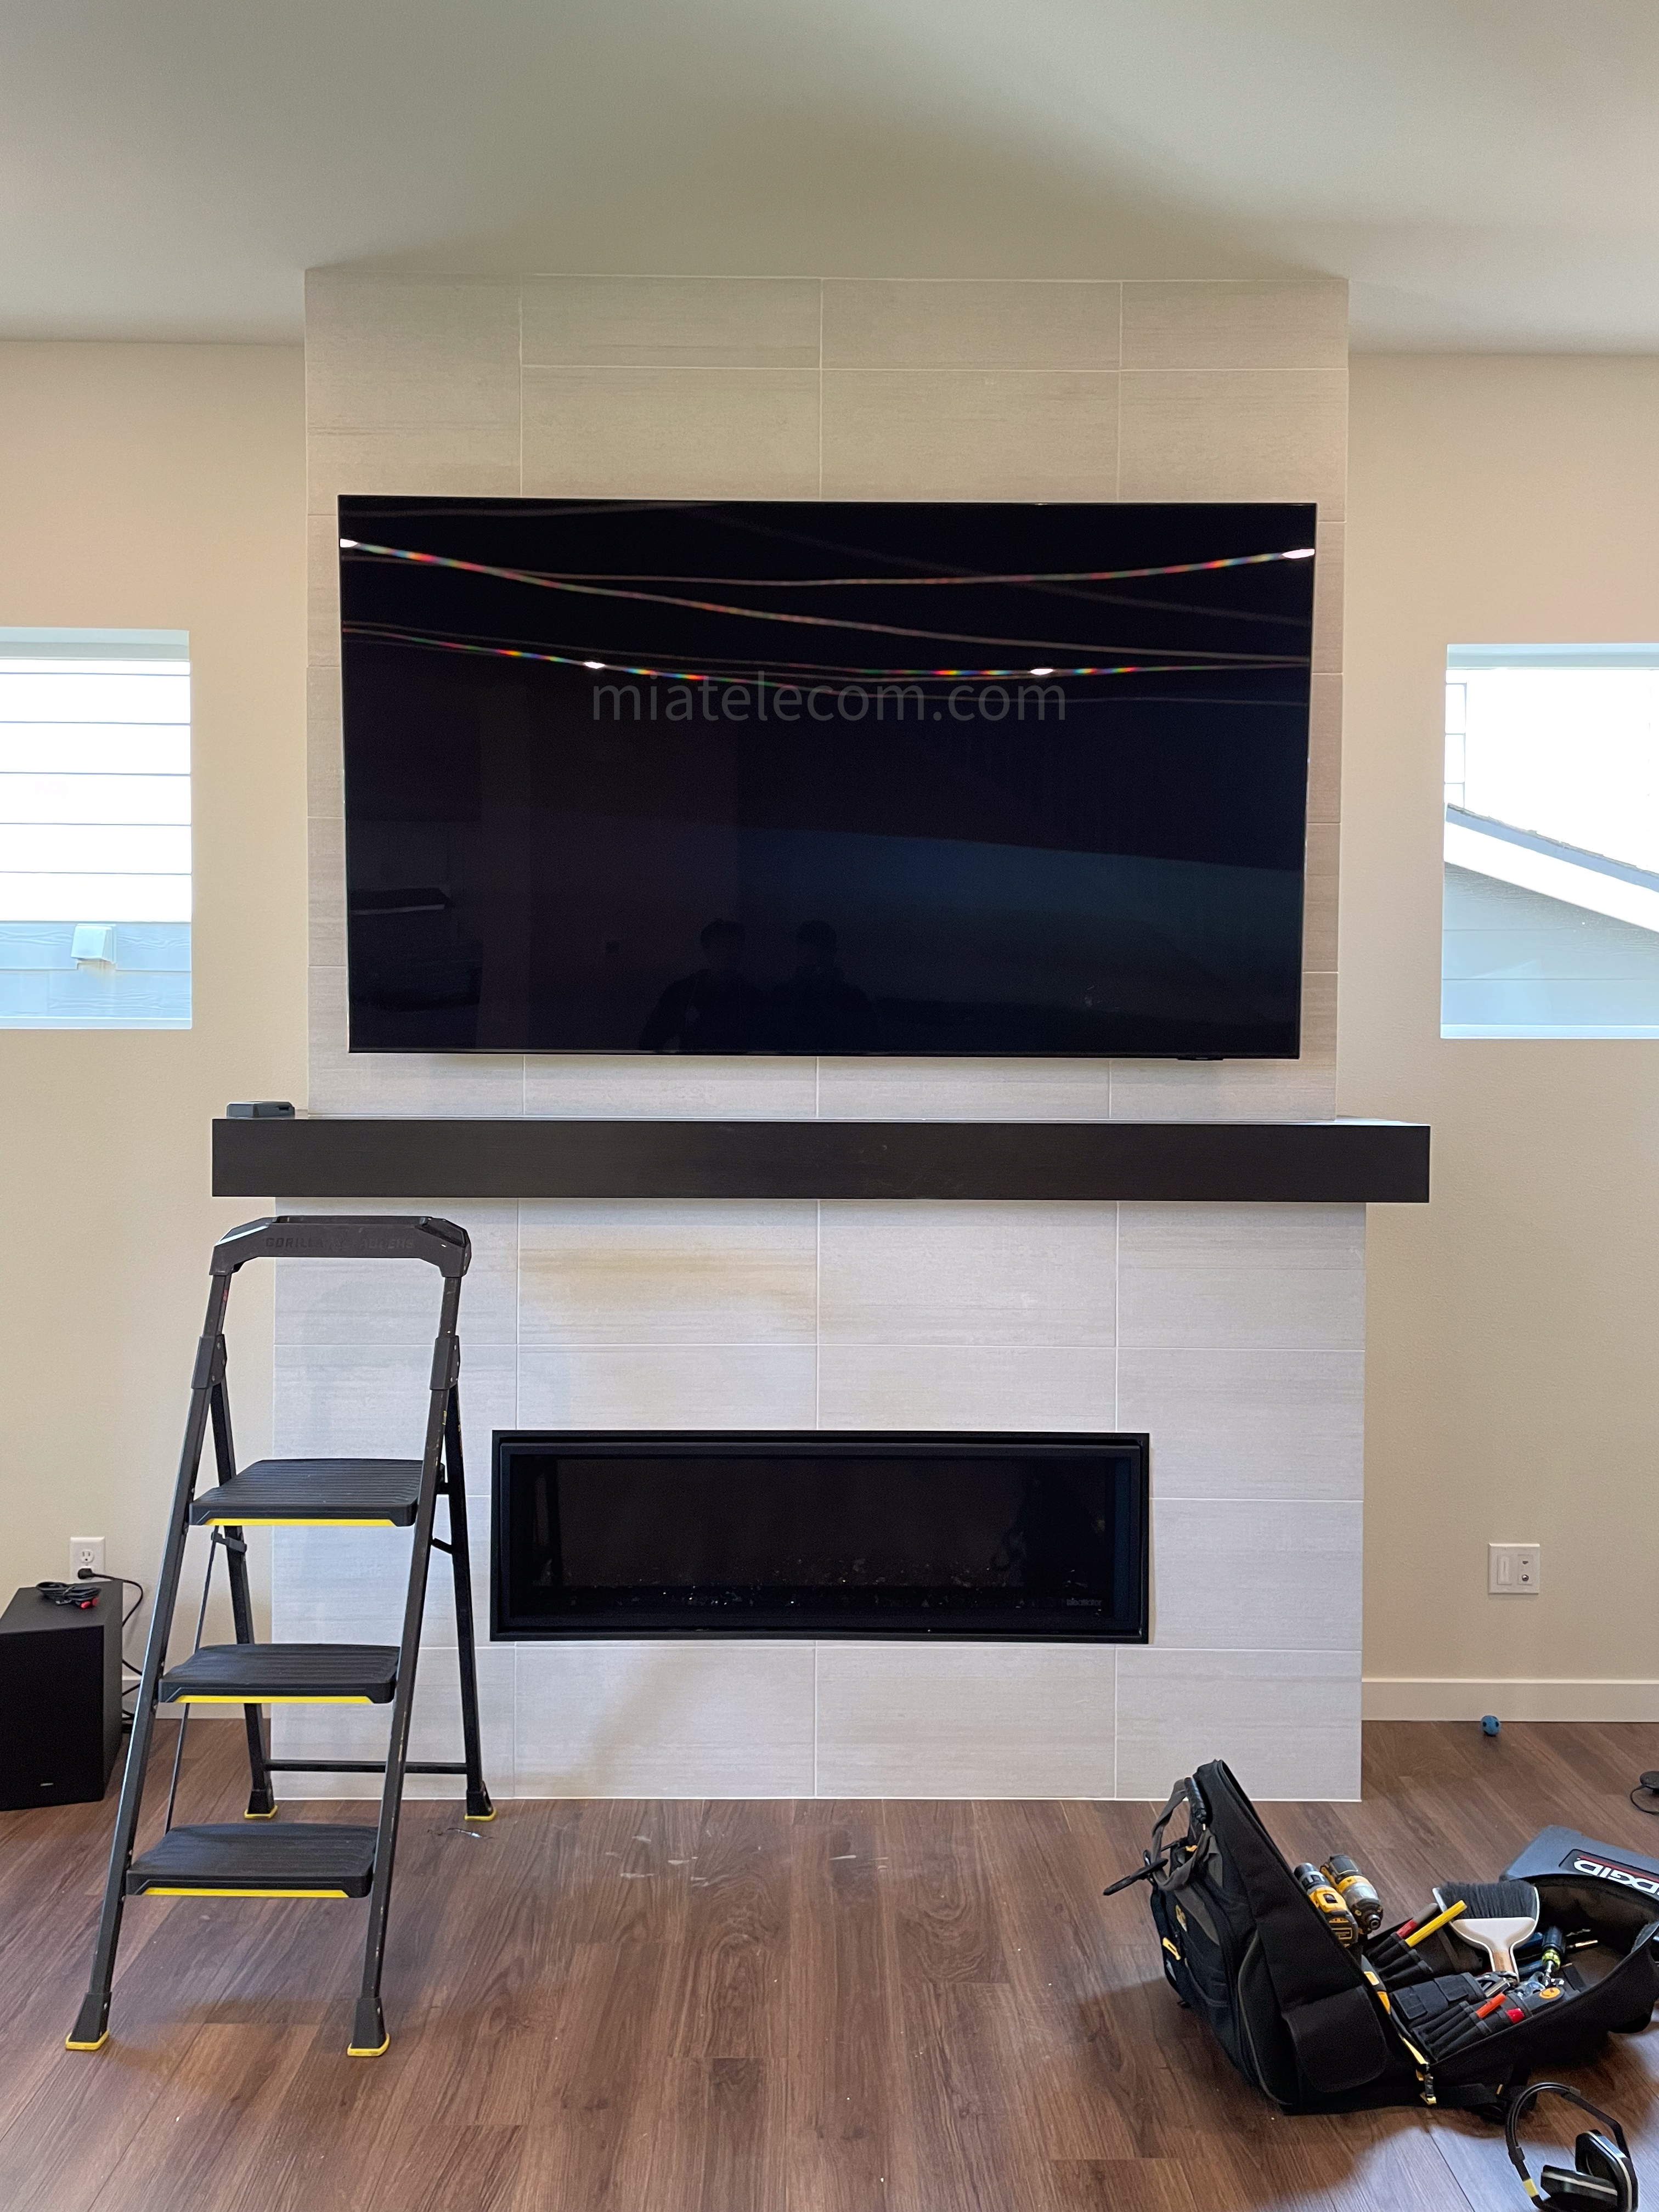 65'' on Tile Over the Fire Place w/ Cable arrangement